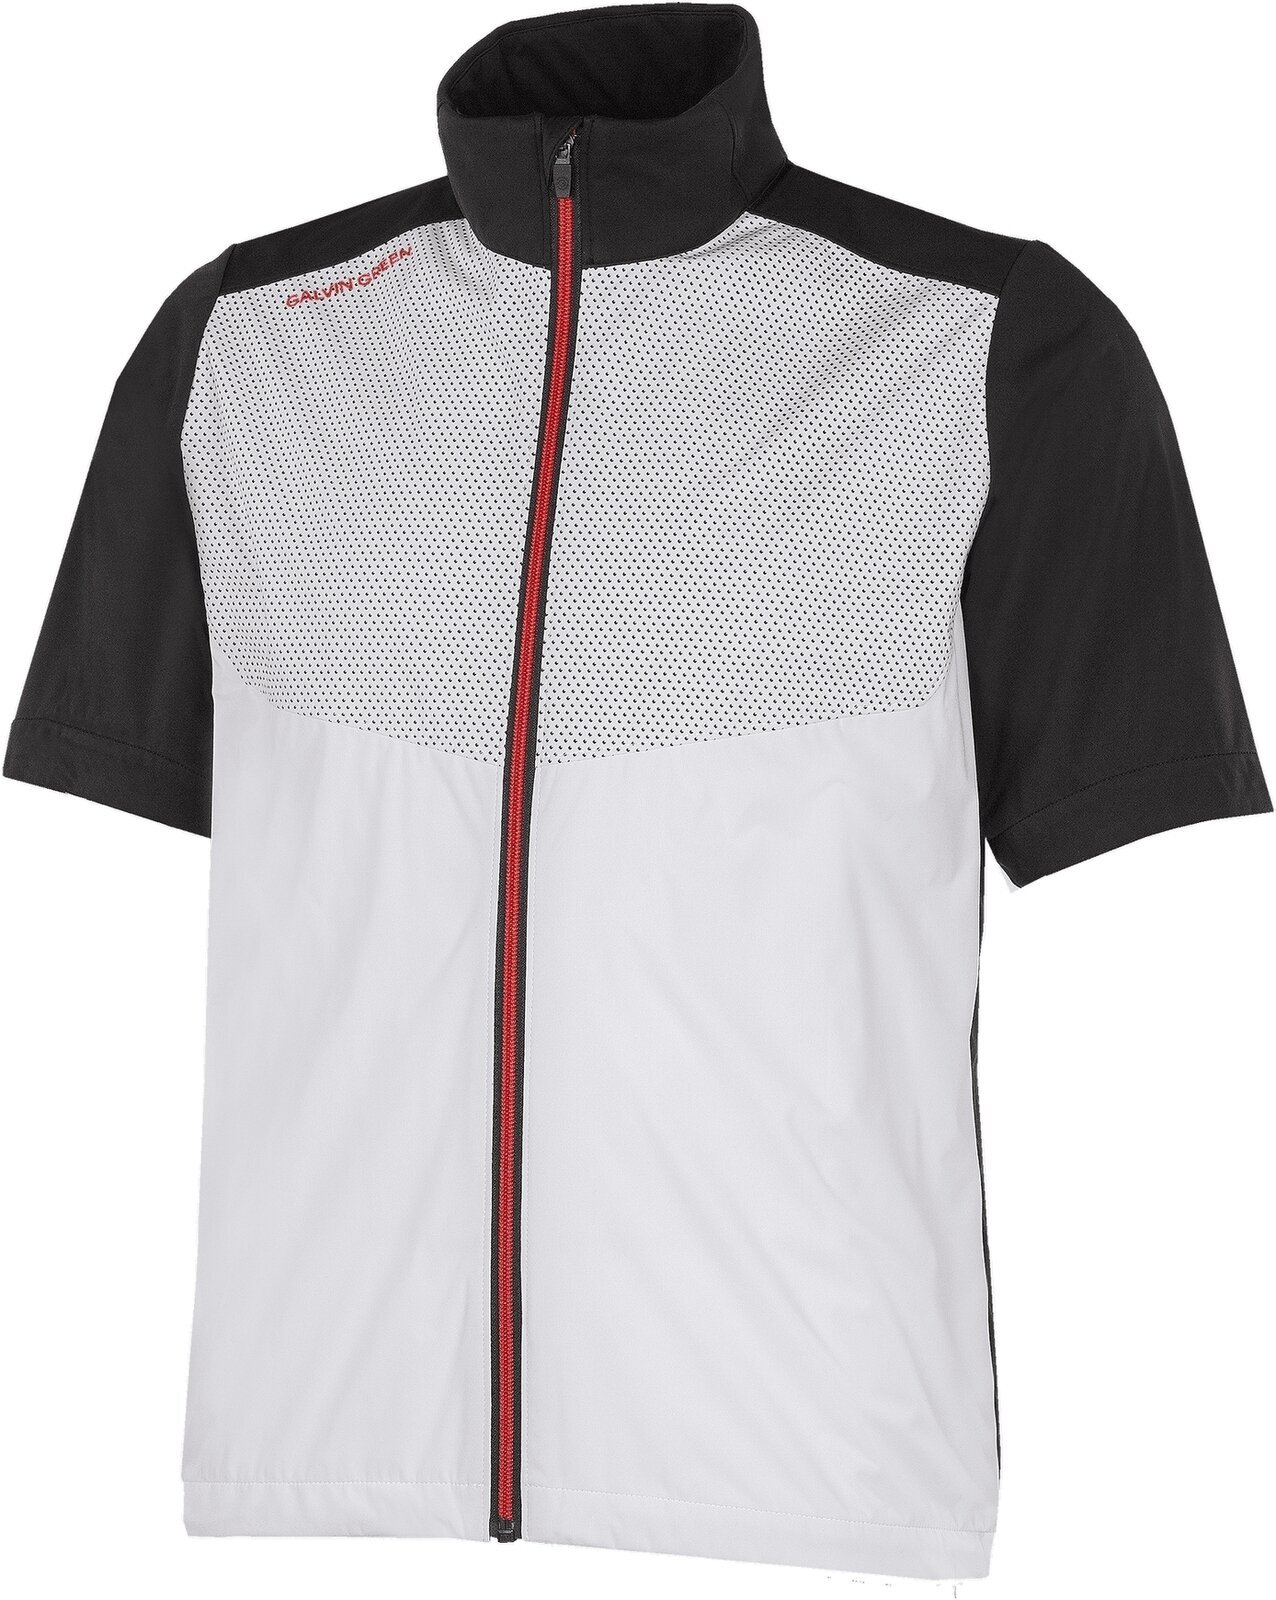 Jacket Galvin Green Livingston Mens Windproof And Water Repellent Short Sleeve Jacket White/Black/Red L